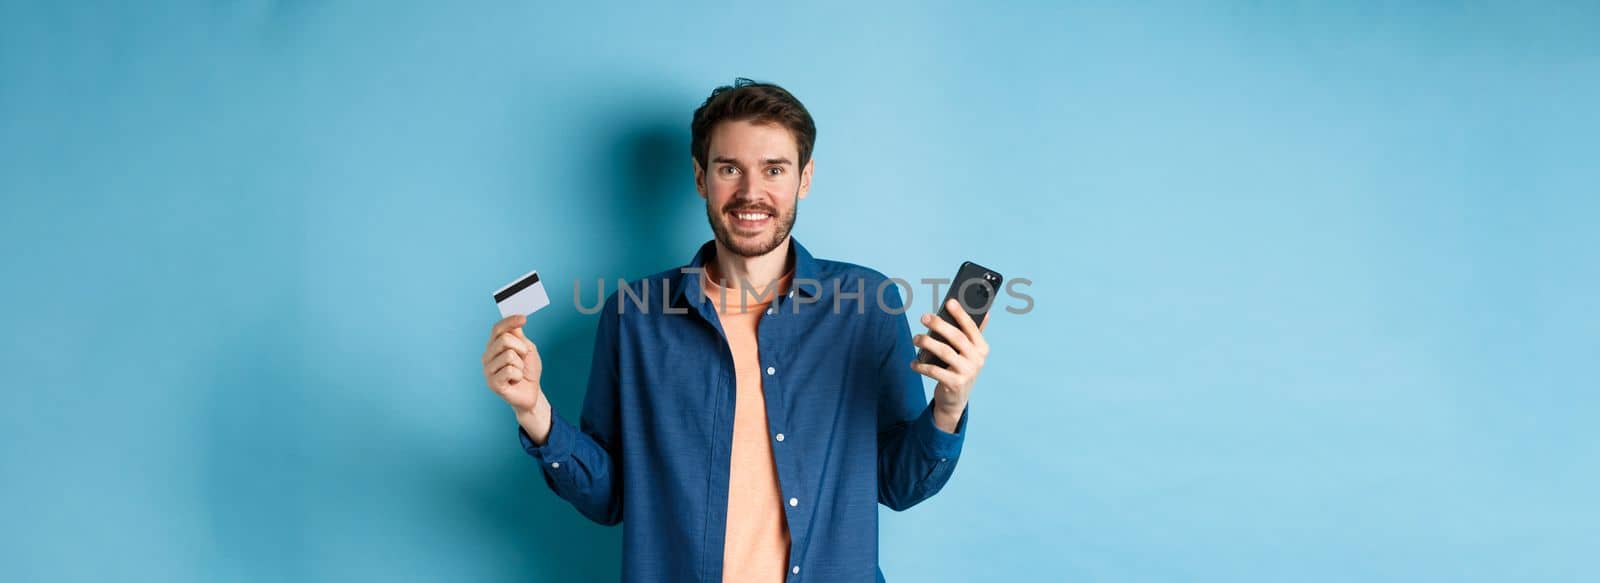 E-commerce concept. Excited young man holding smartphone and plastic credit card, shopping online, standing on blue background.